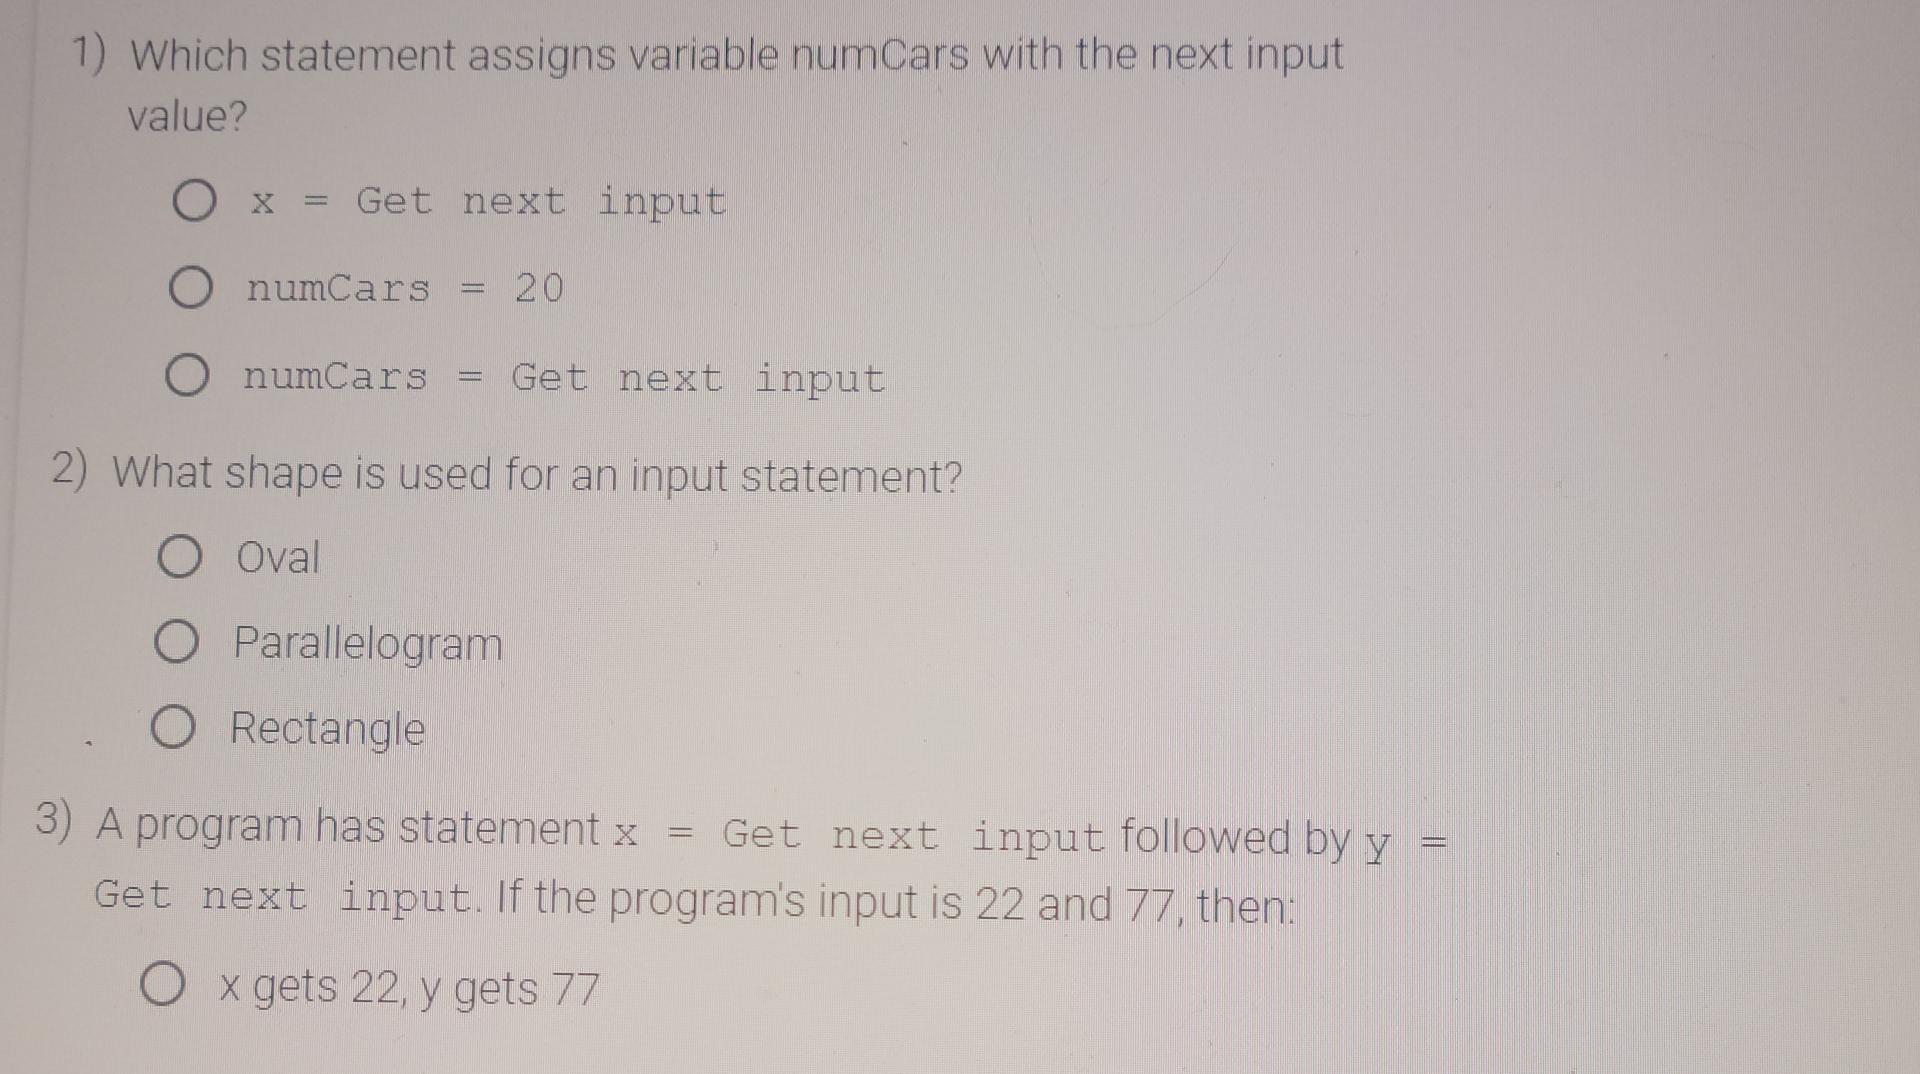 write an assignment statement to assign numcars with 99